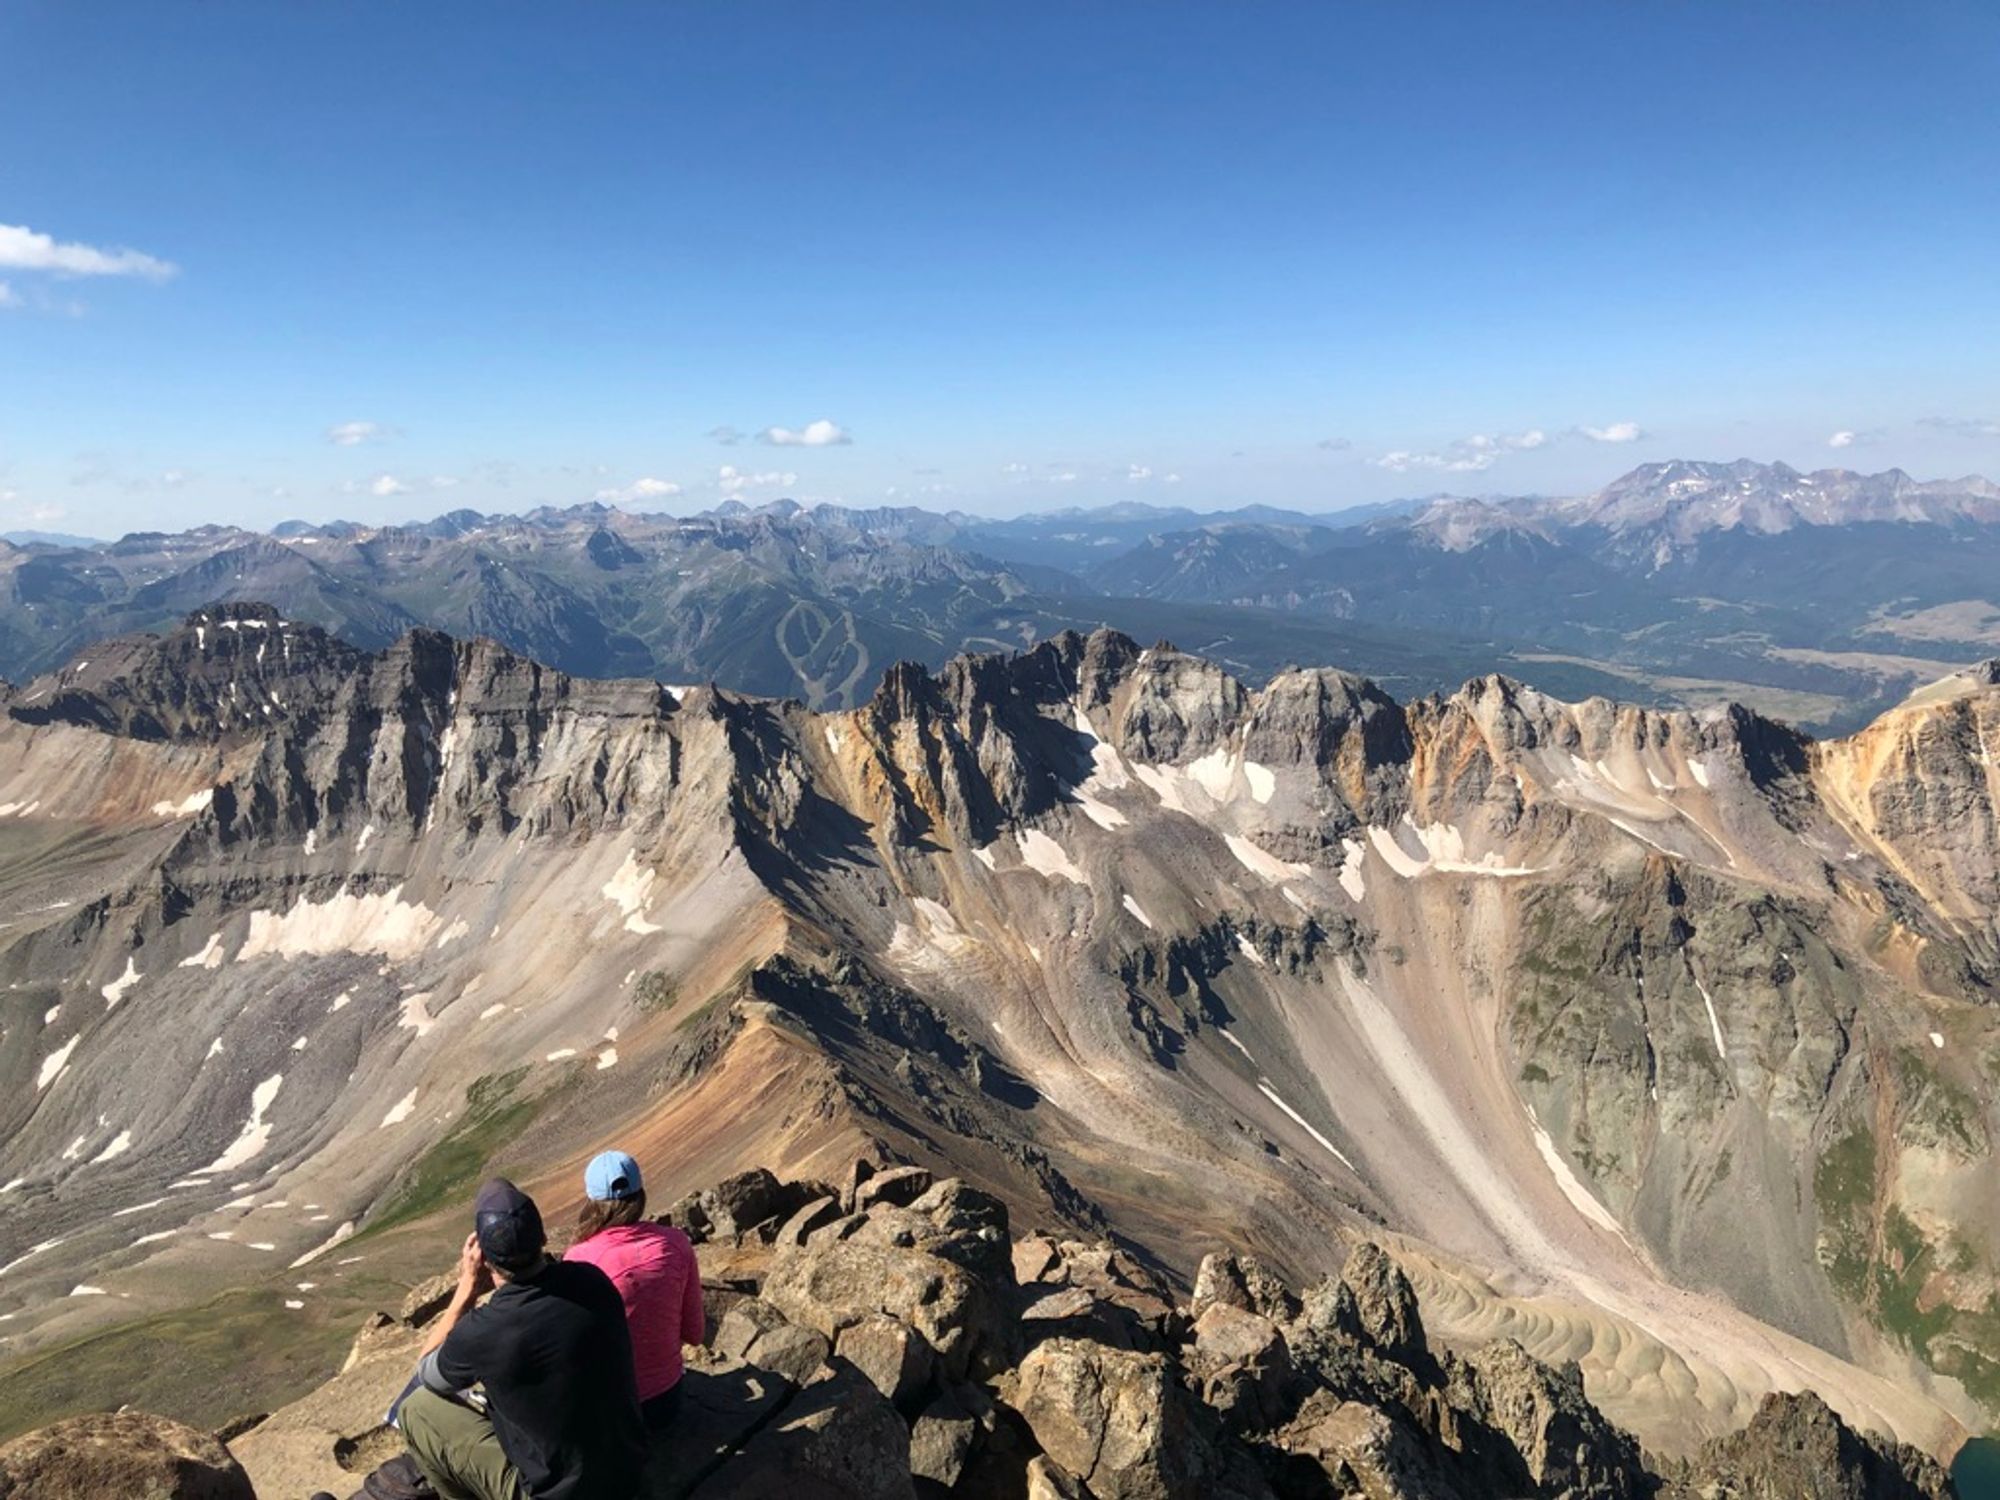 View of the Rockies from the summit